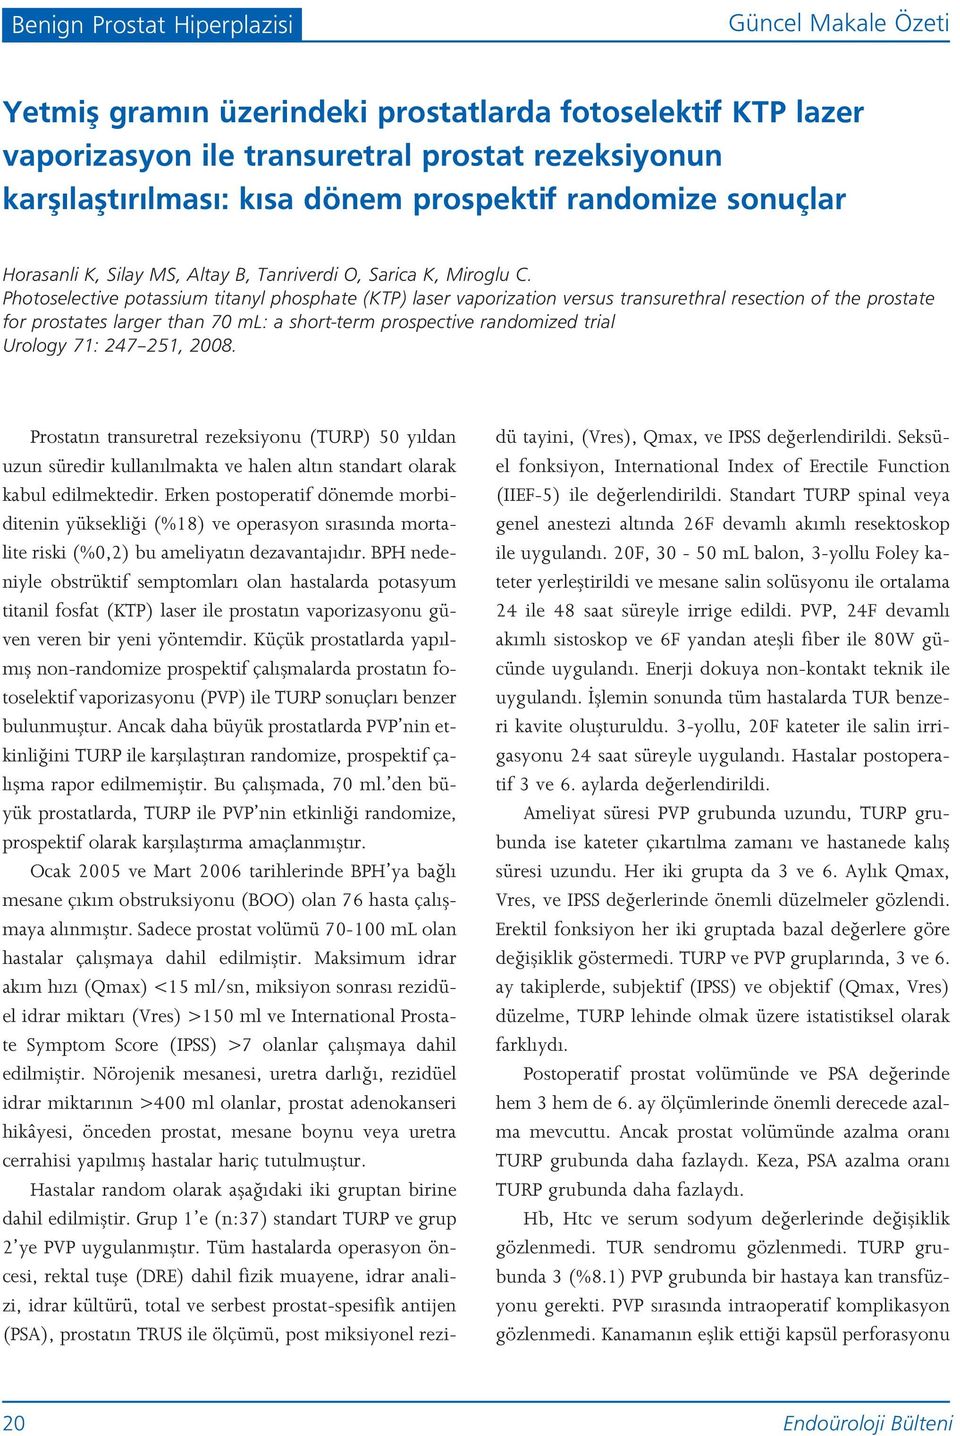 Photoselective potassium titanyl phosphate (KTP) laser vaporization versus transurethral resection of the prostate for prostates larger than 70 ml: a short-term prospective randomized trial Urology